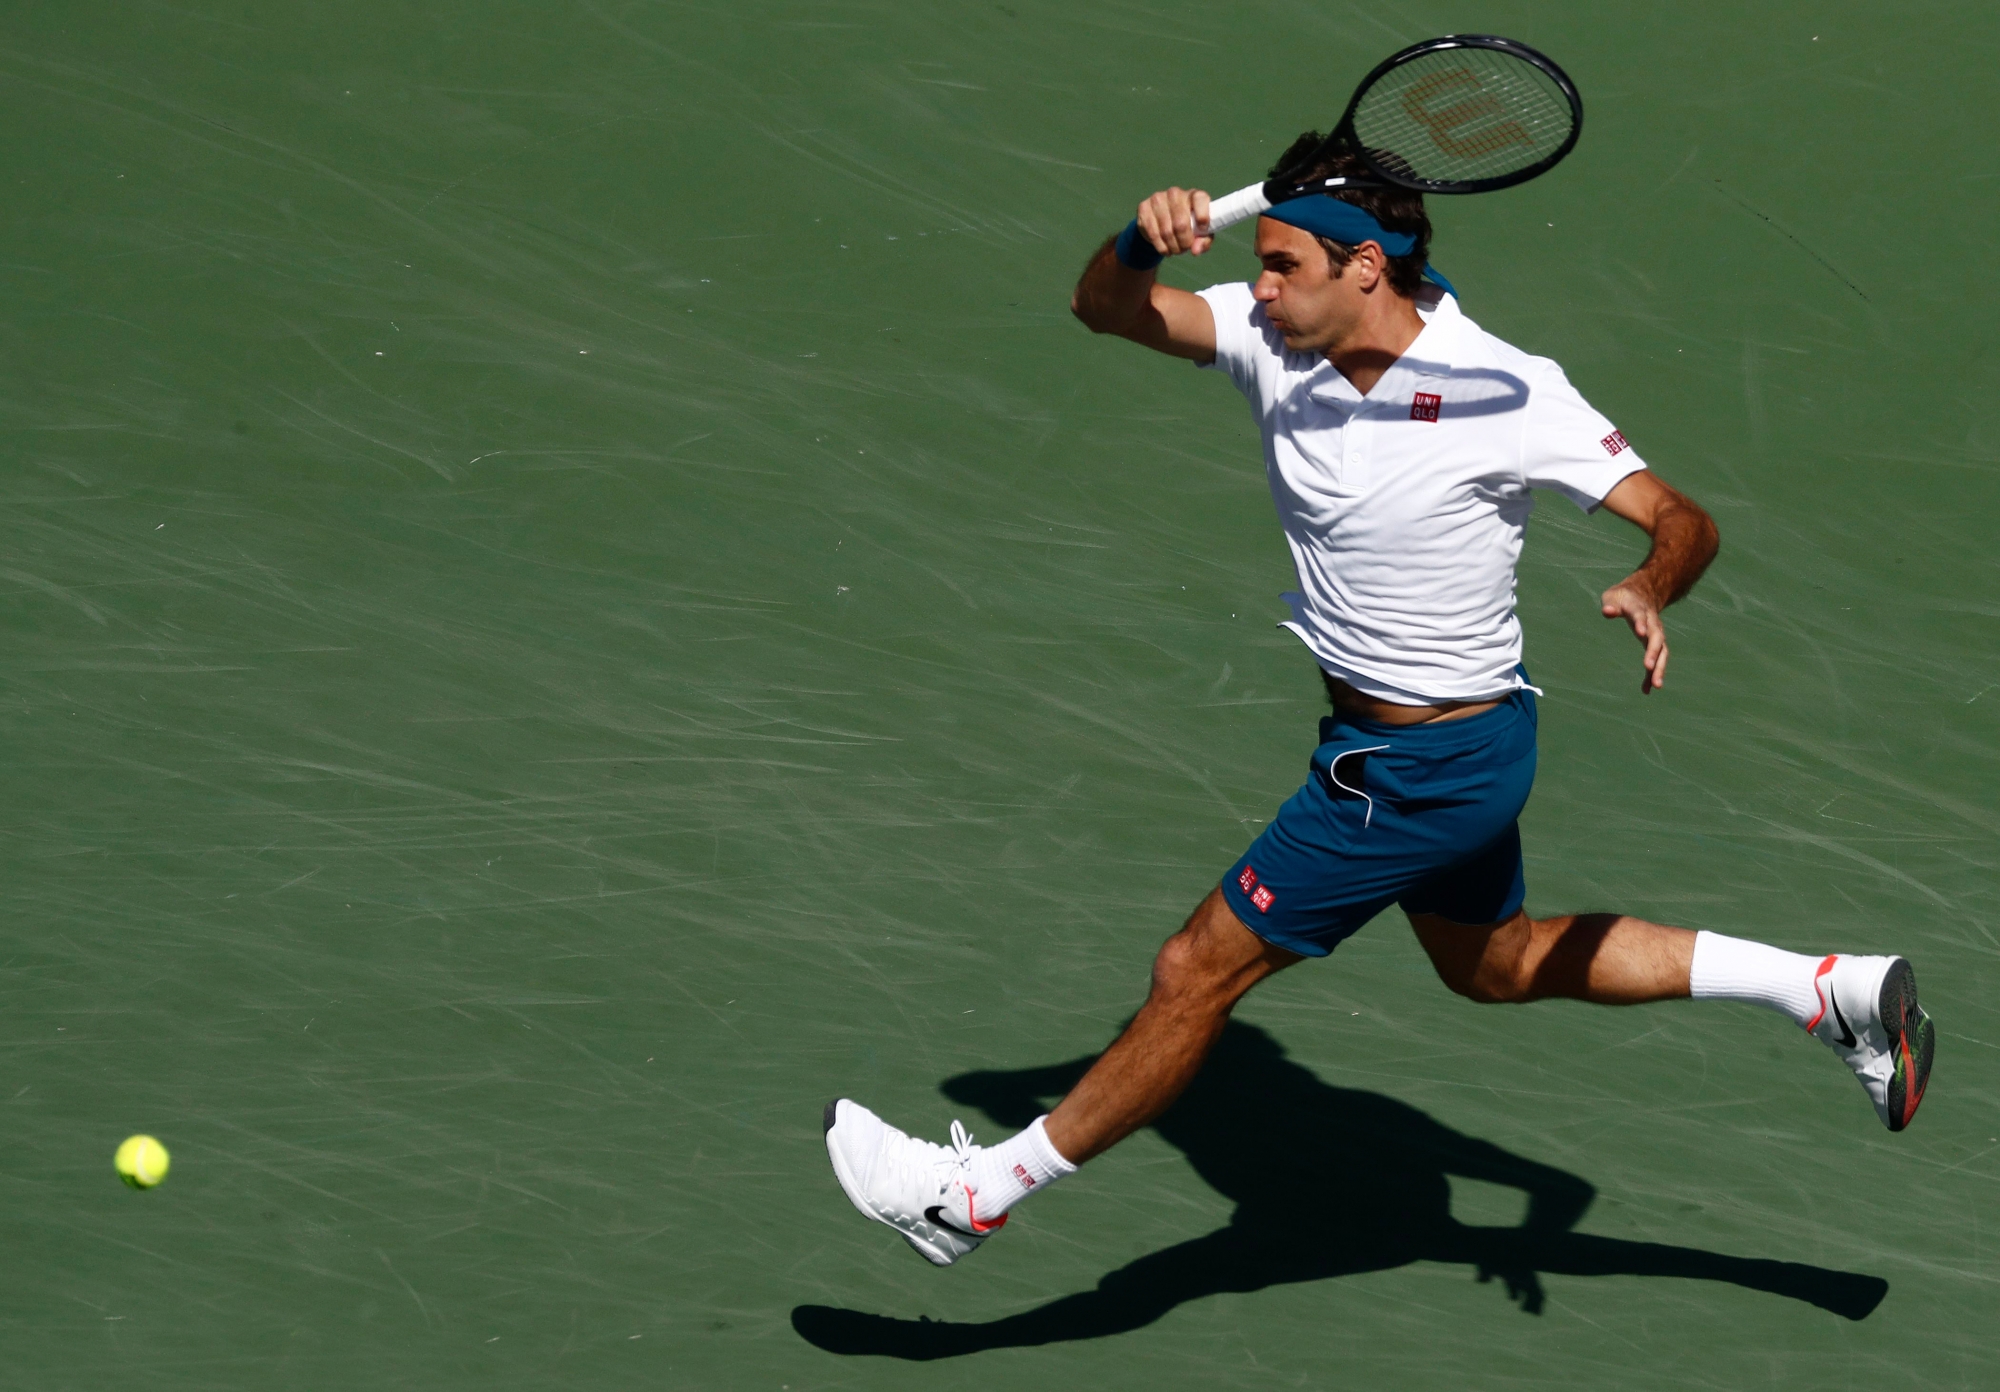 epa07440715 Roger Federer of Switzerland in action against Hubert Hurkacz of Poland during the BNP Paribas Open tennis tournament at the Indian Wells Tennis Garden in Indian Wells, California, USA, 15 March 2019. The men's and women's final will be played, 17 March 2019.  EPA/LARRY W. SMITH USA TENNIS BNP PARIBAS OPEN